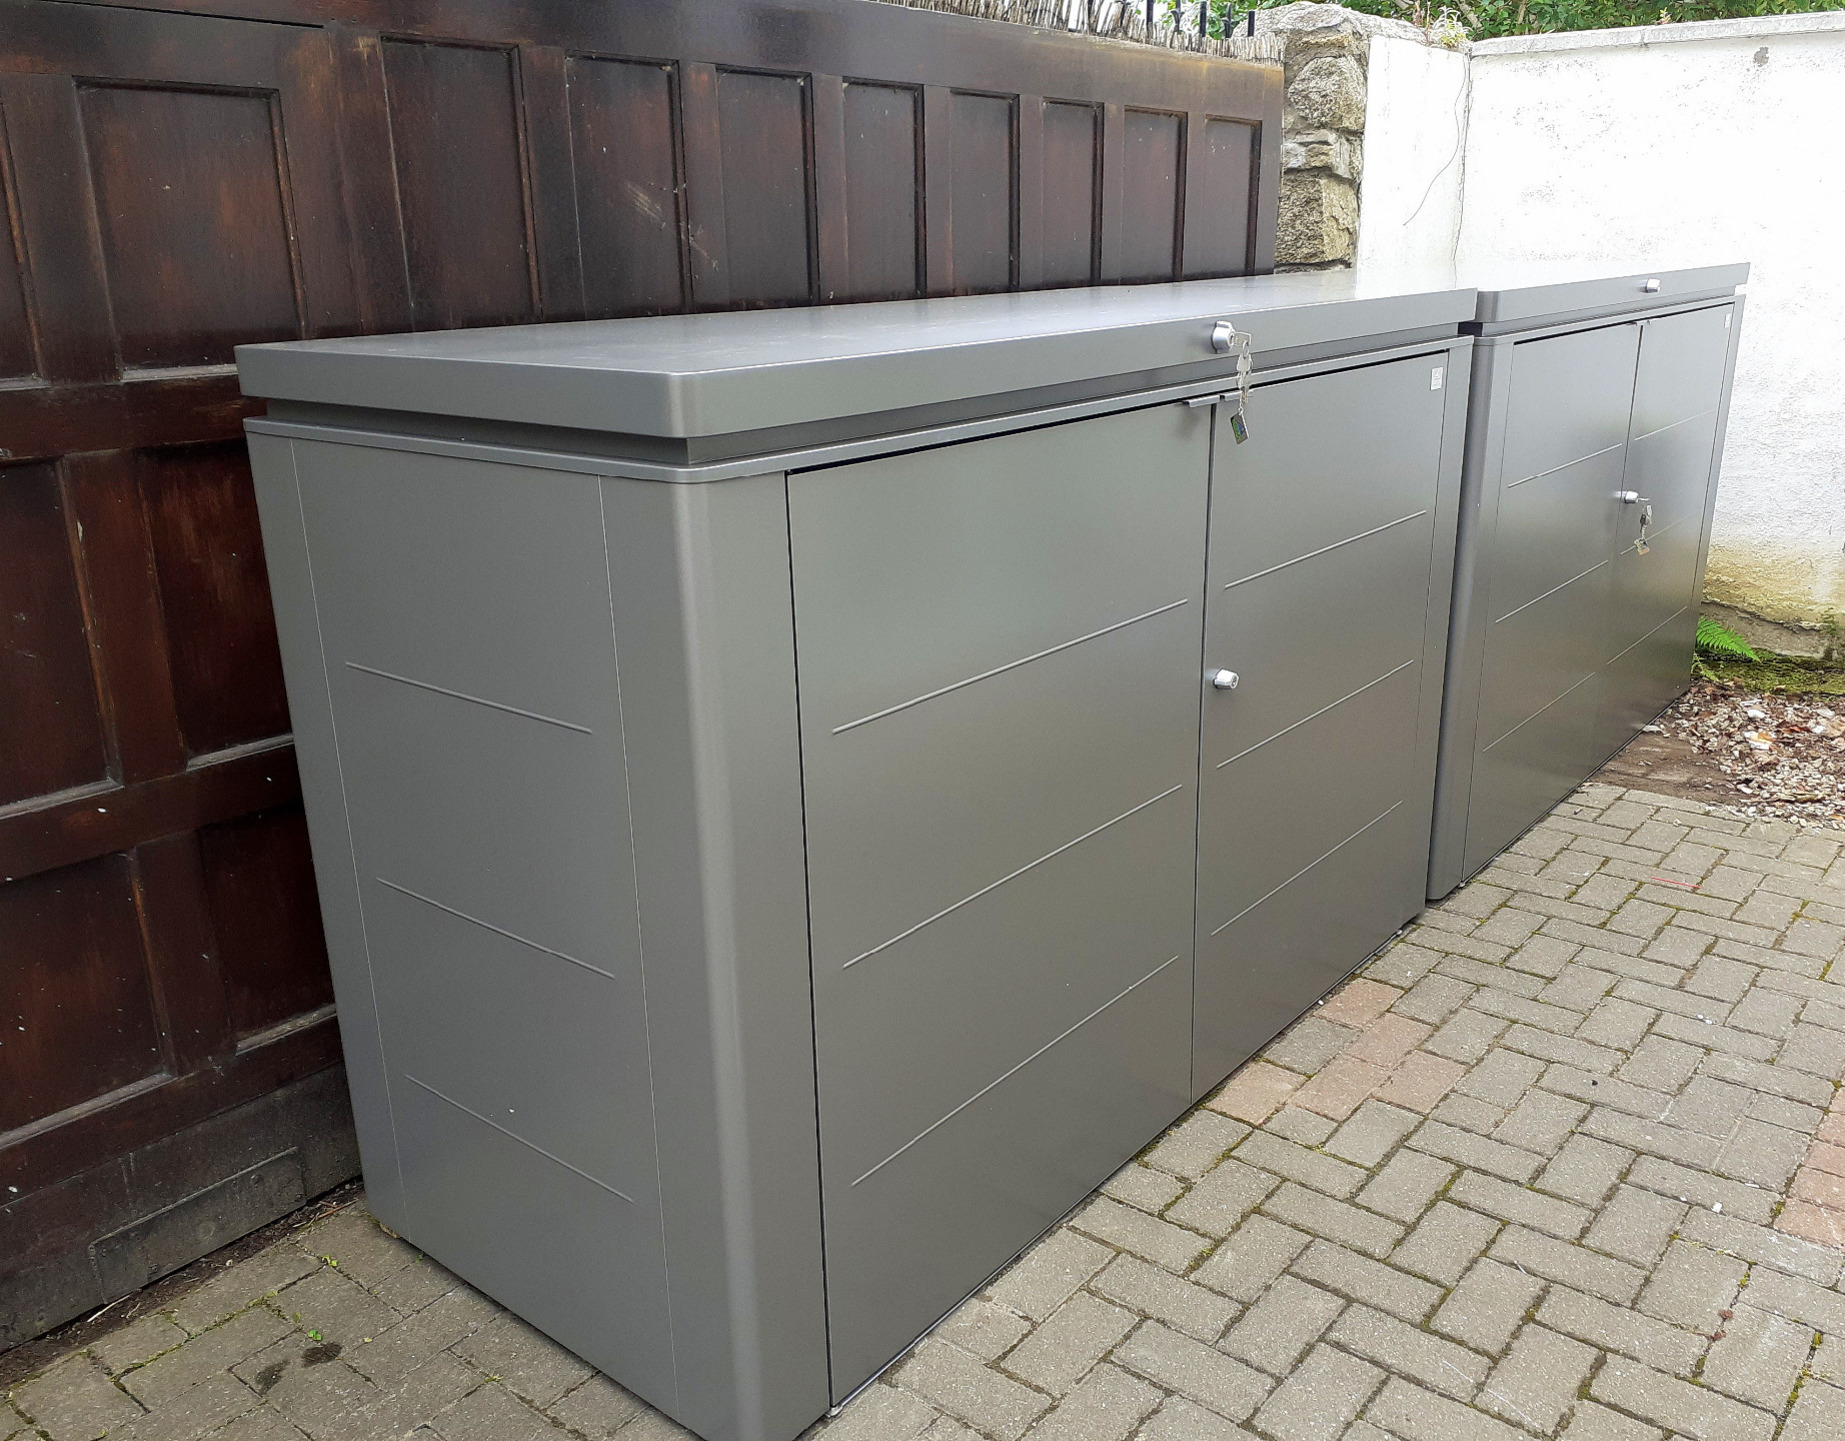 The HighBoard 200 Garden Storage Unit | Supplied + Fitted in Dun Laoghaire, Co Dublin | We supply + fit Biohort Garden Sheds & Storage Solutions Nationwide | Owen Chubb Landscapers, Tel 087 2306 128